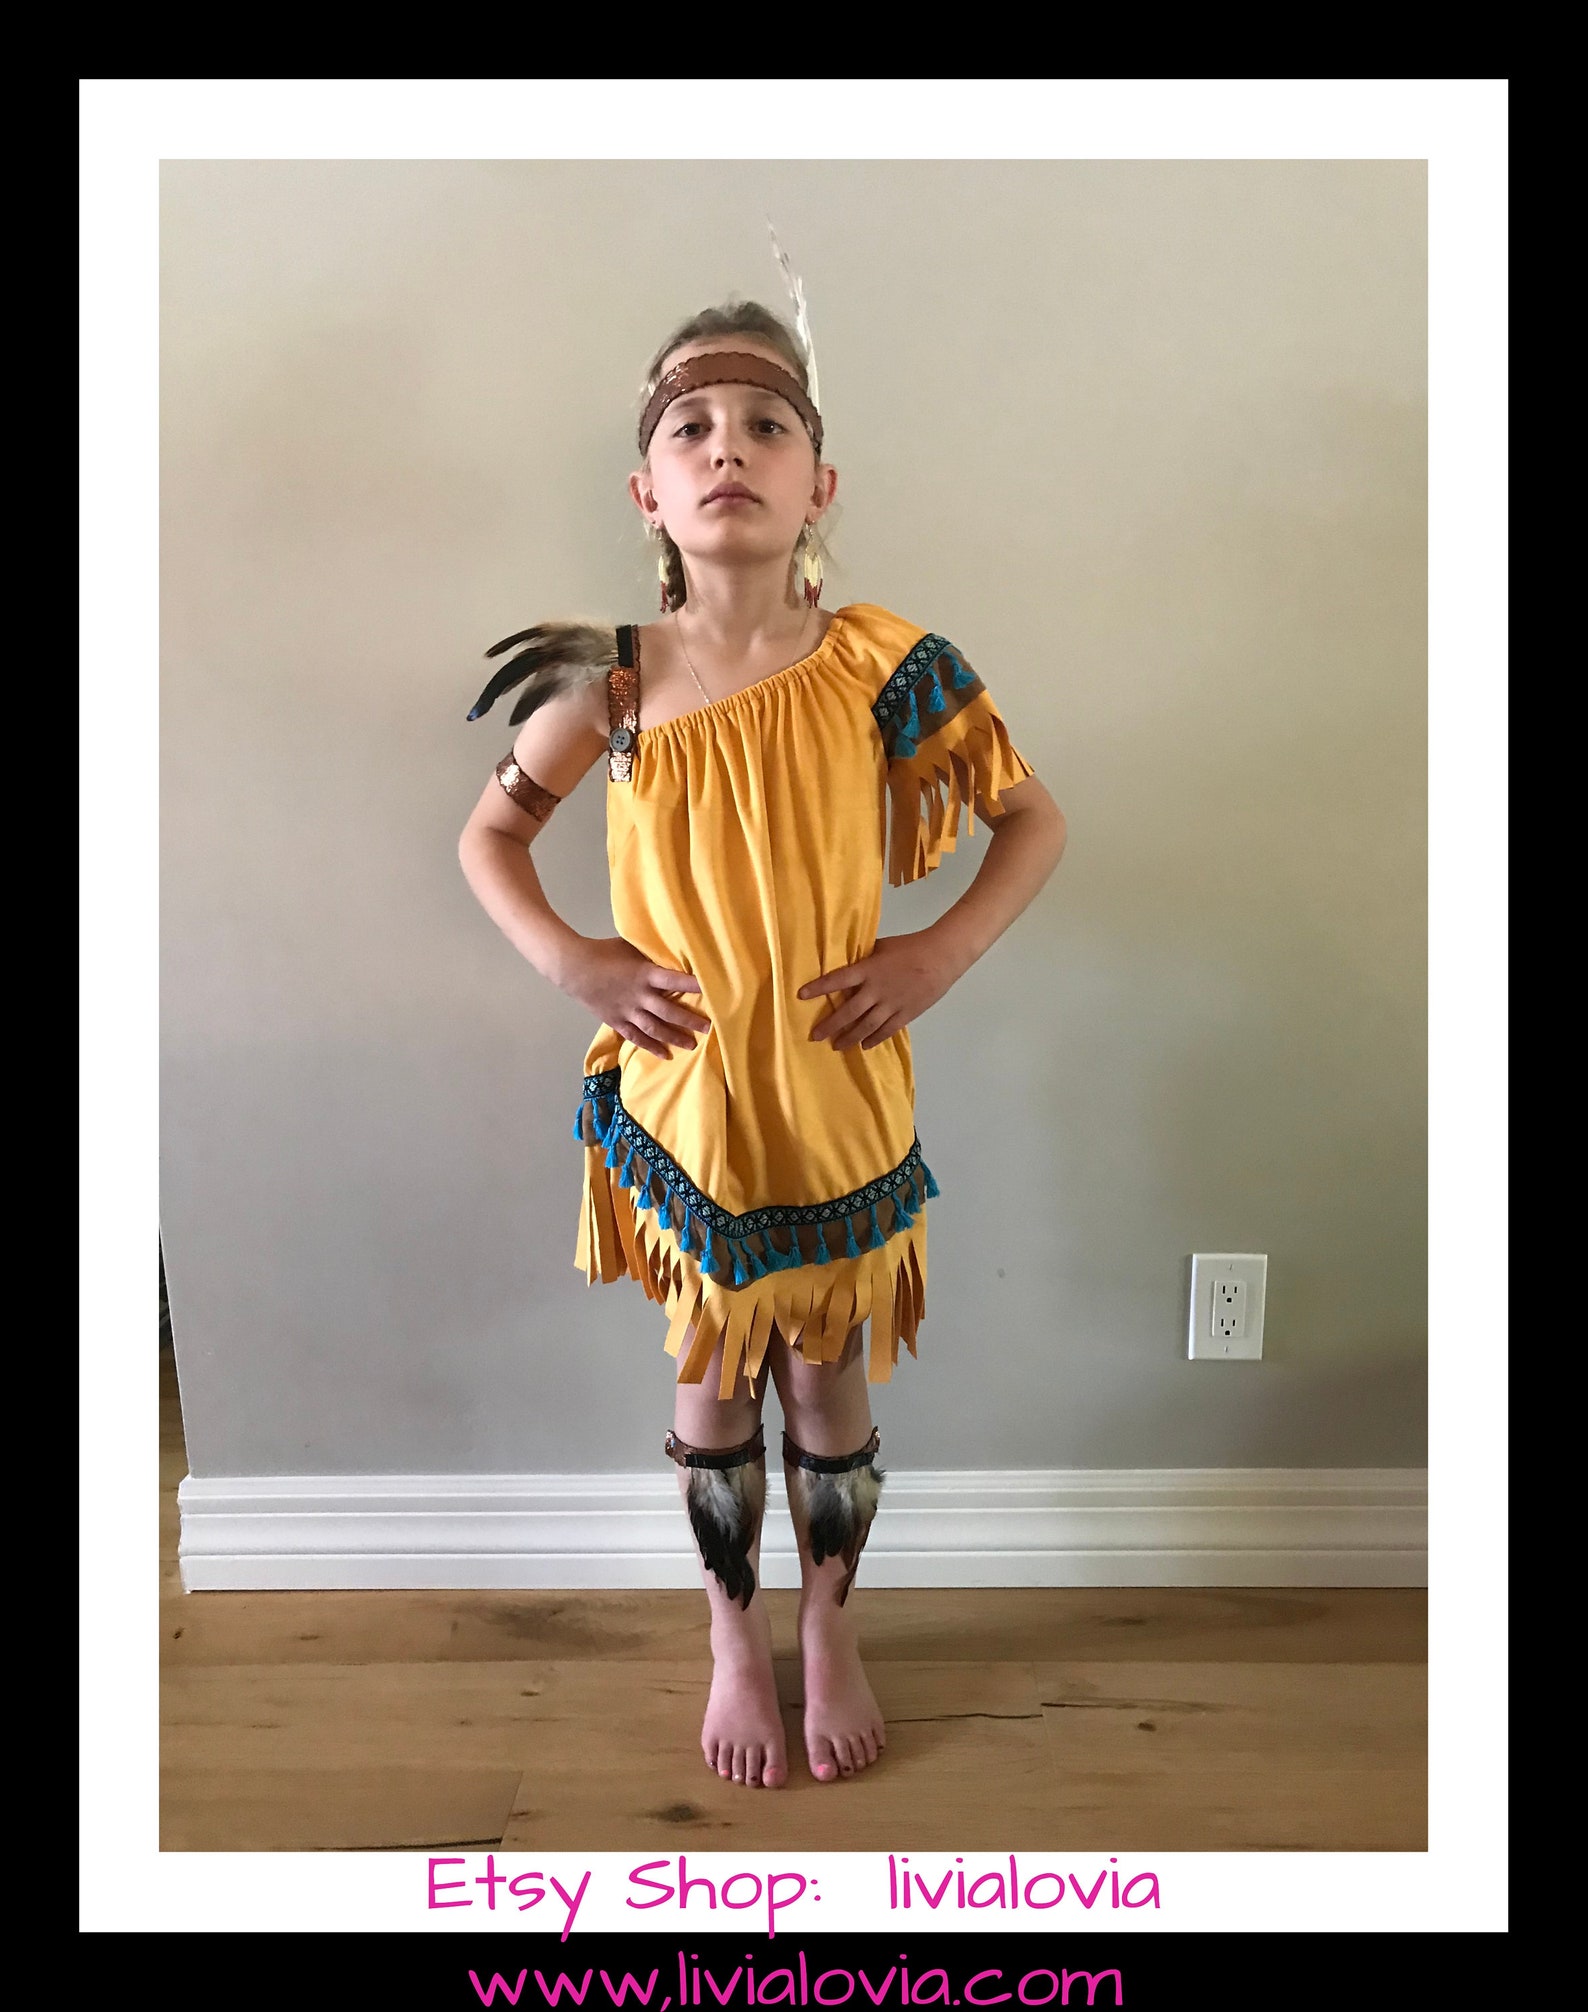  Tiger  Lily  Costume  Indian  Costume  Native American Costume  